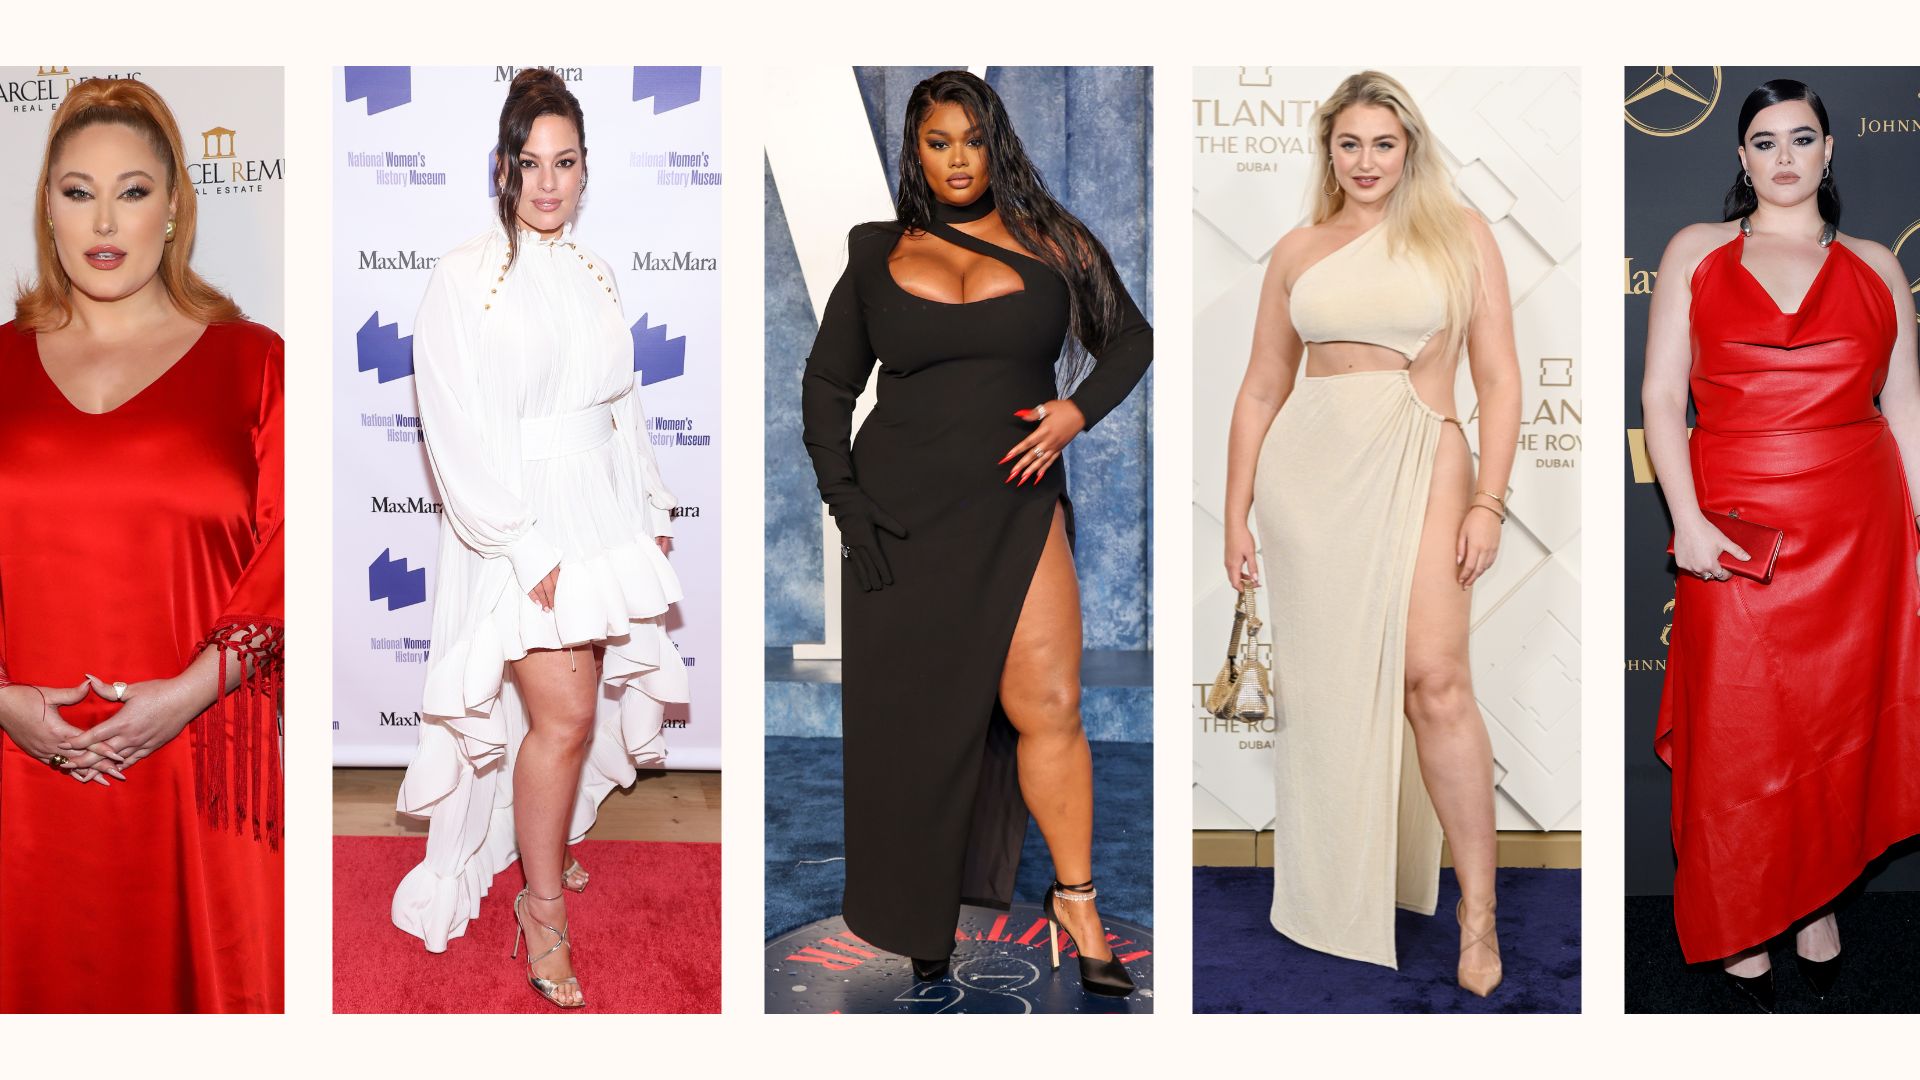 The Bold and the Beautiful: Our Favorite Big-Assed BBW Starlets!